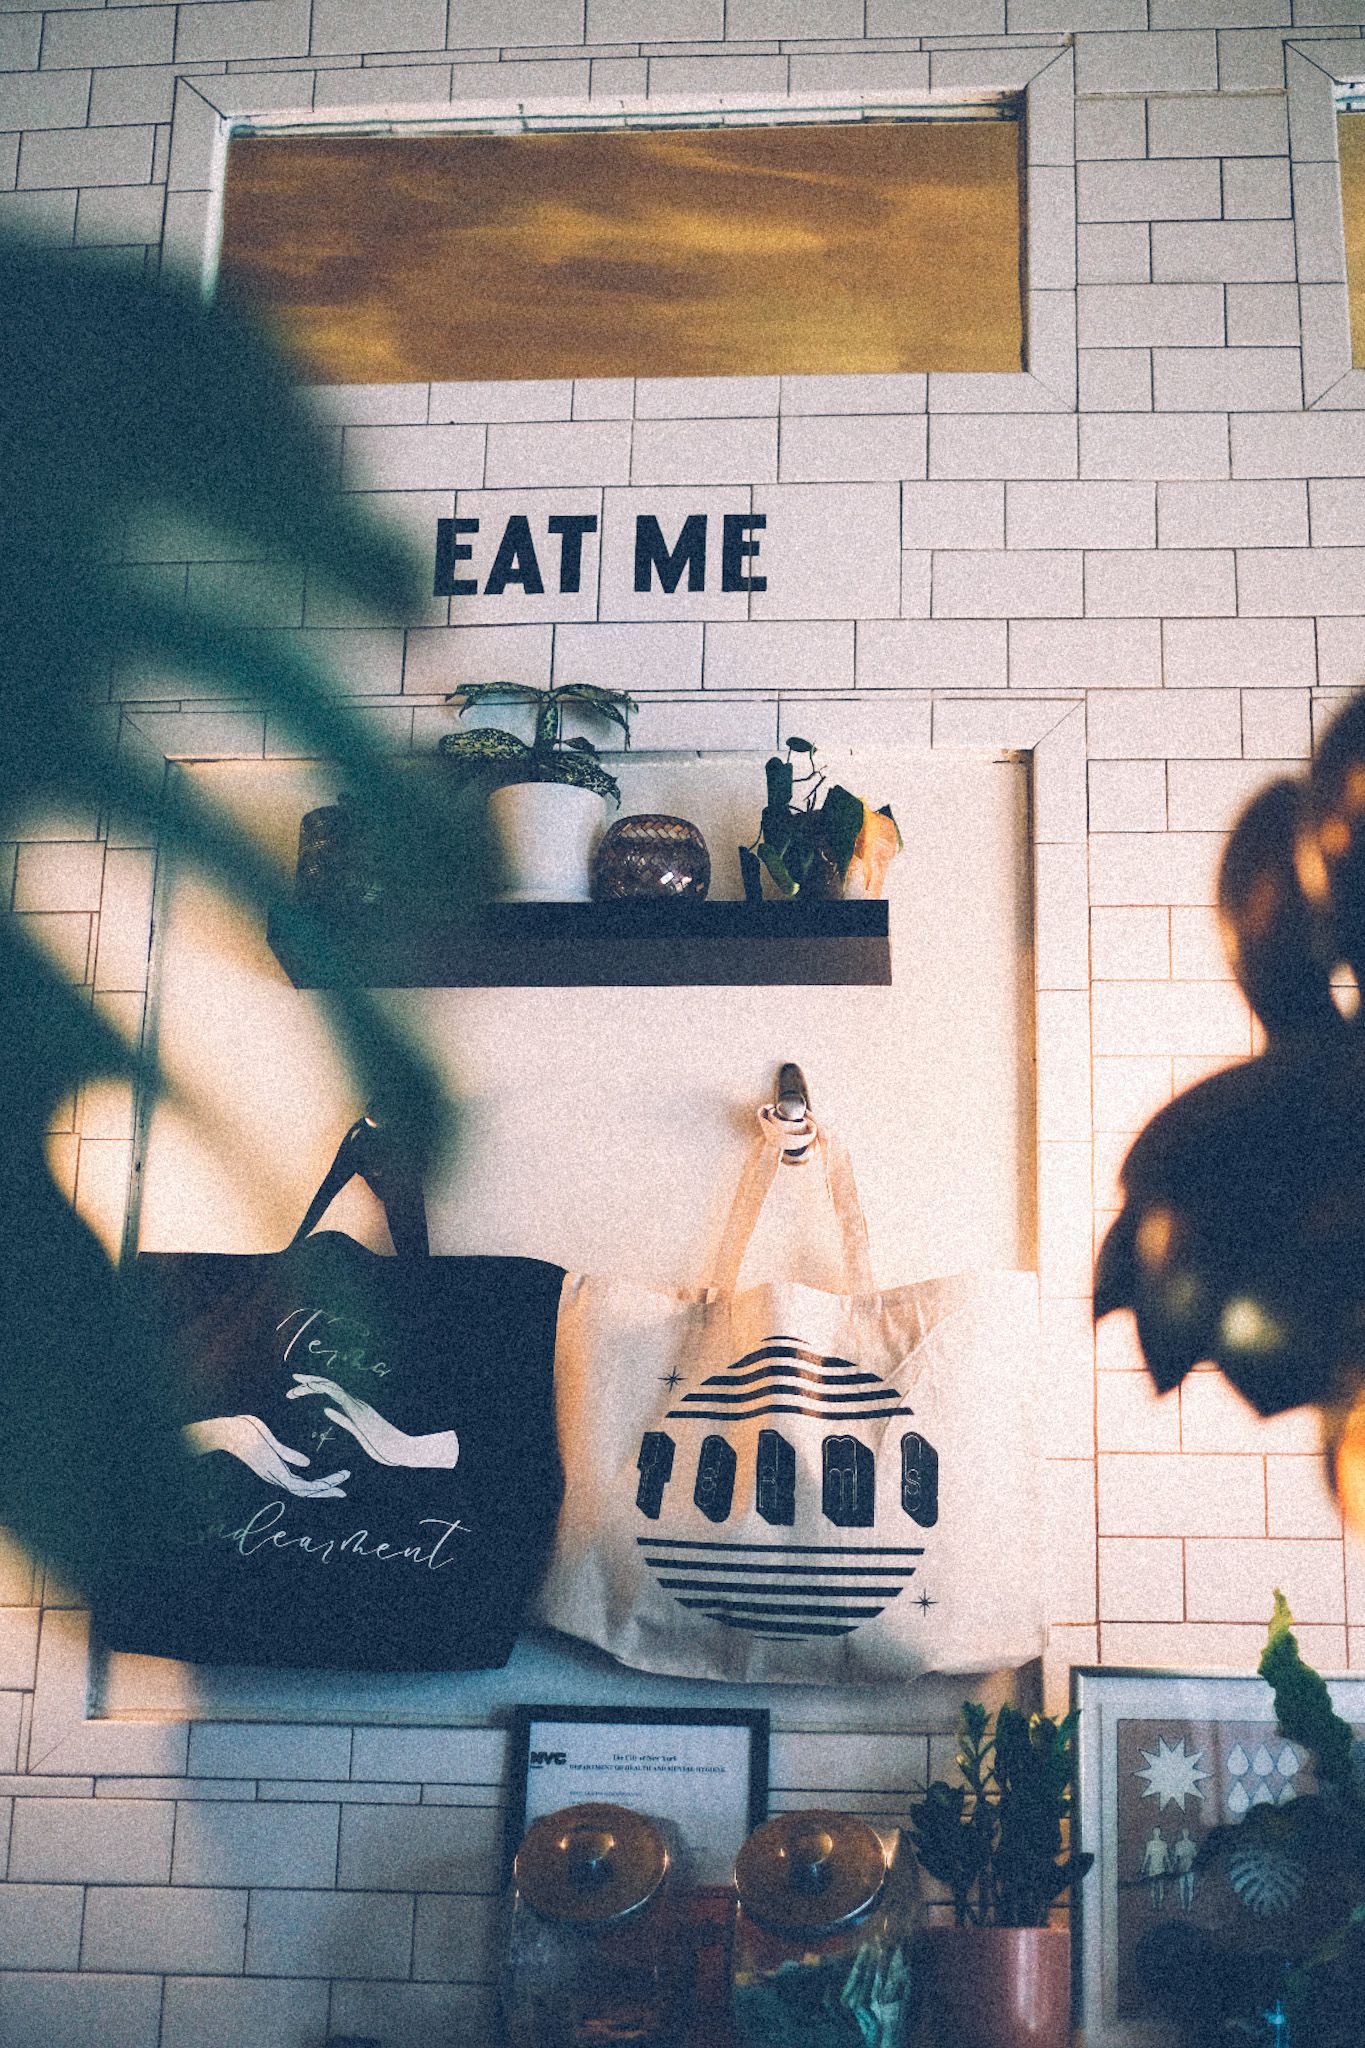 The words “eat me” are adhered against white brick in a coffee shop, framed by hip tote bags and plants half-obscuring the photo.